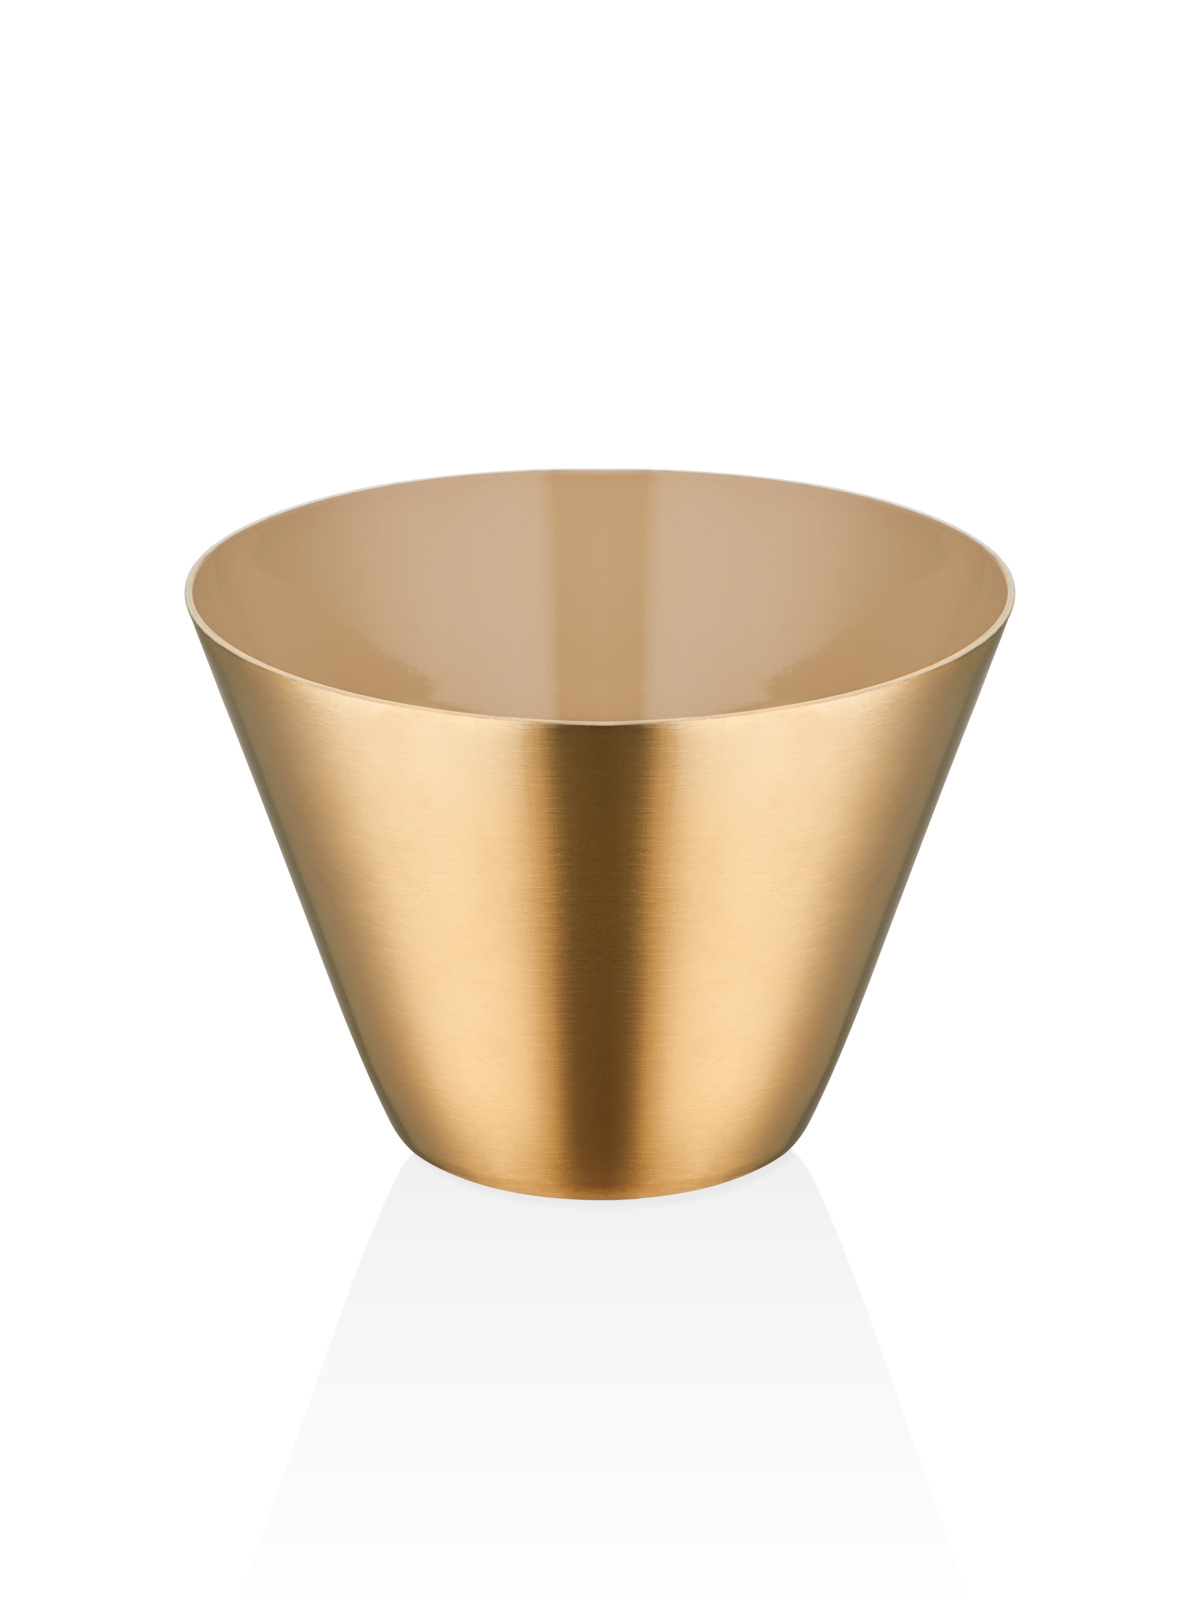 Conical - Nut Bowl - Gold & Beige